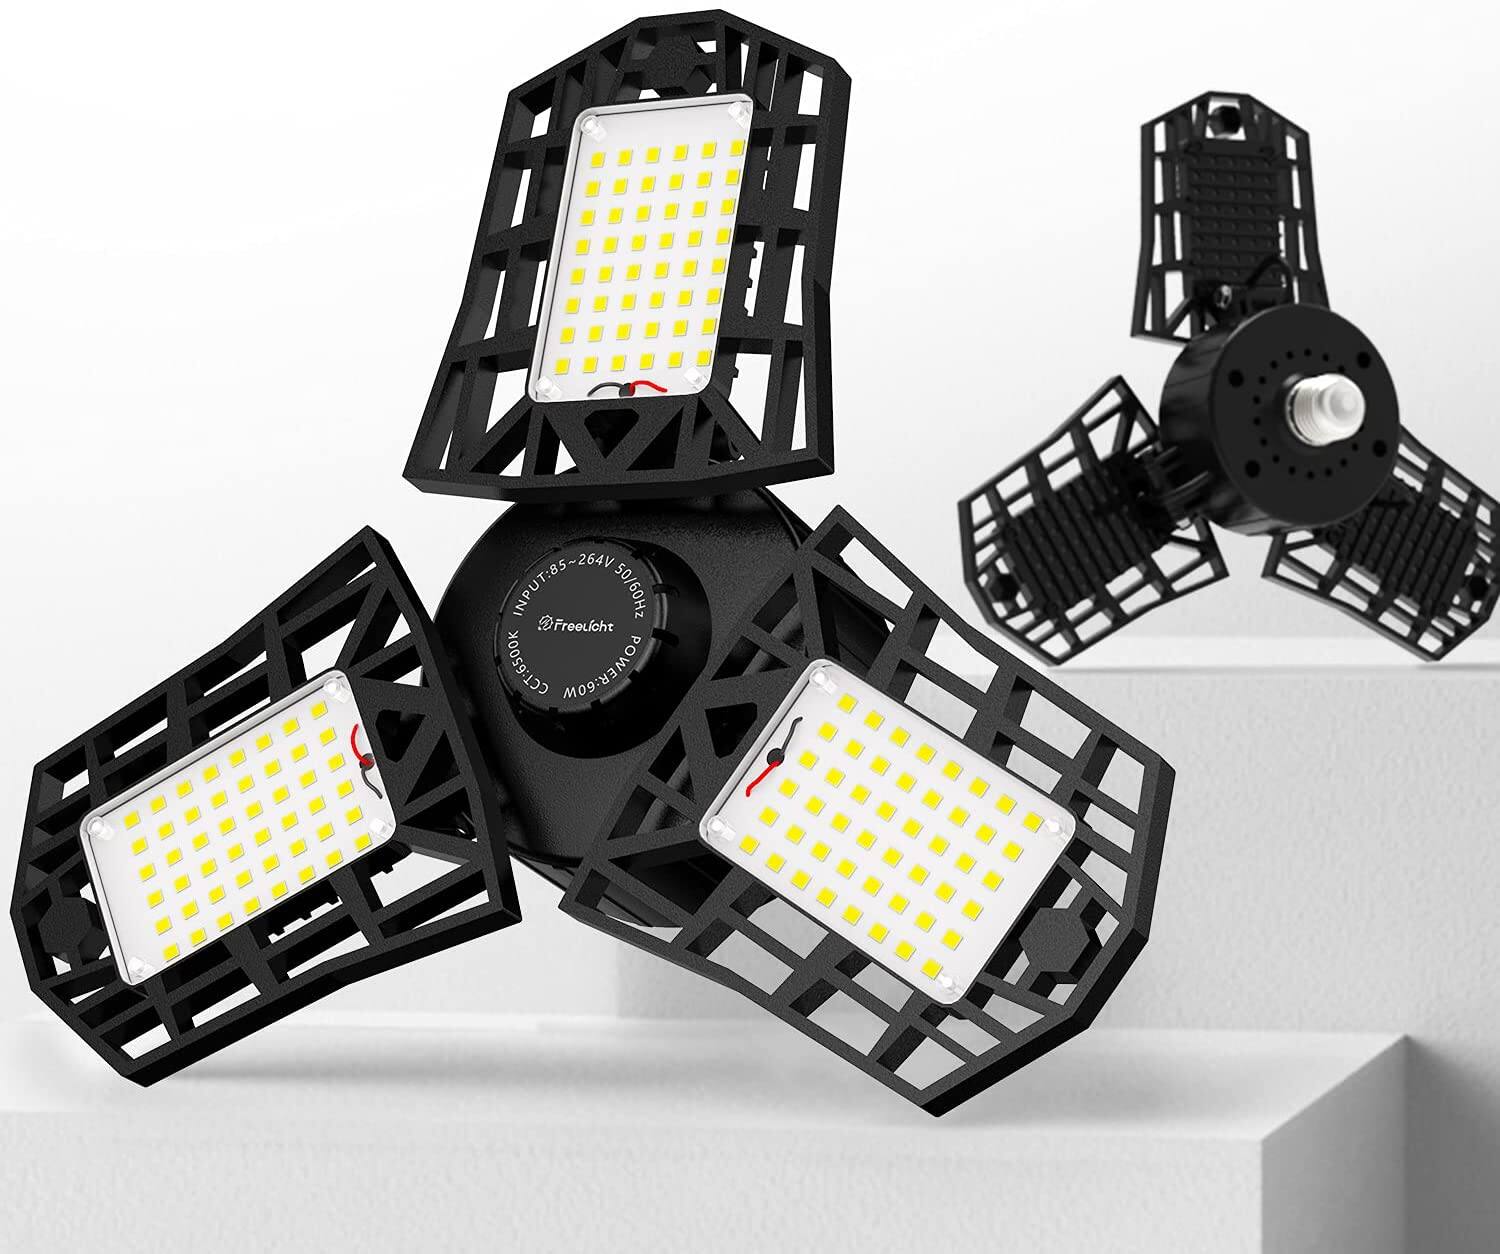 2-Pack LED Garage Light(60W 6000LM 6500K) w/ Multi-Position Panels for $19.49 + Free Shipping